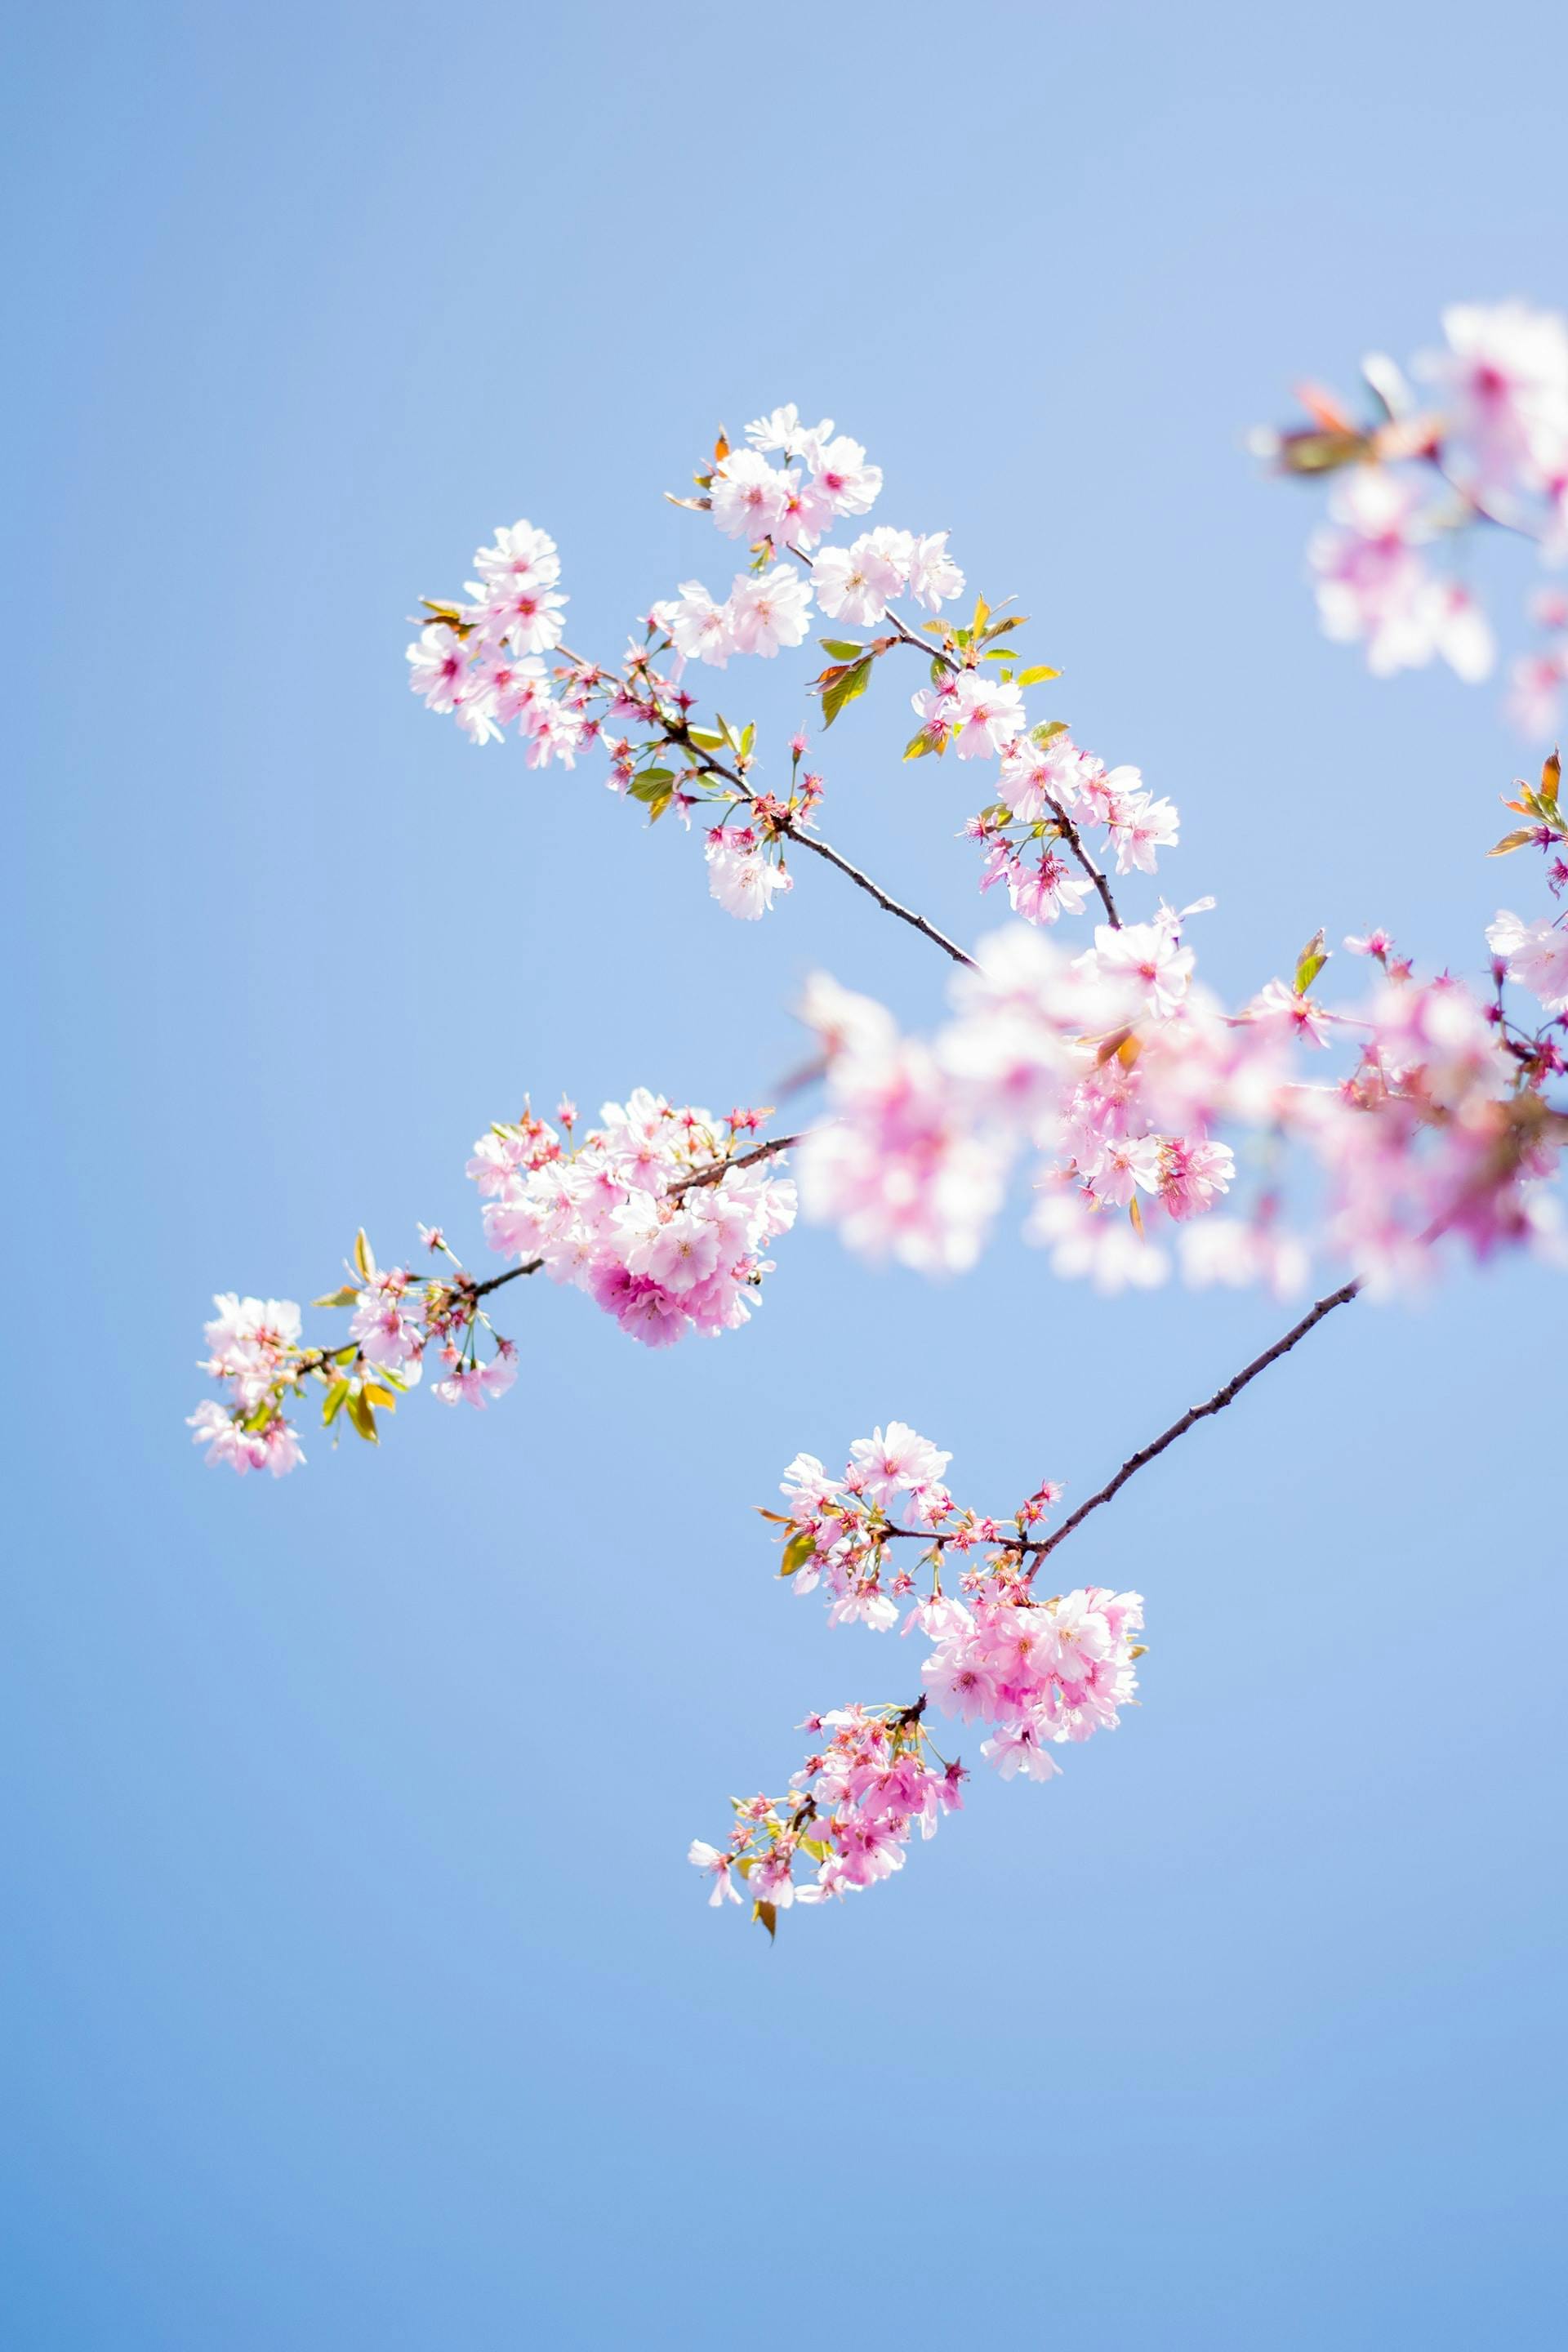 cherry blossom branches at an upward angle into a beautiful blue sky